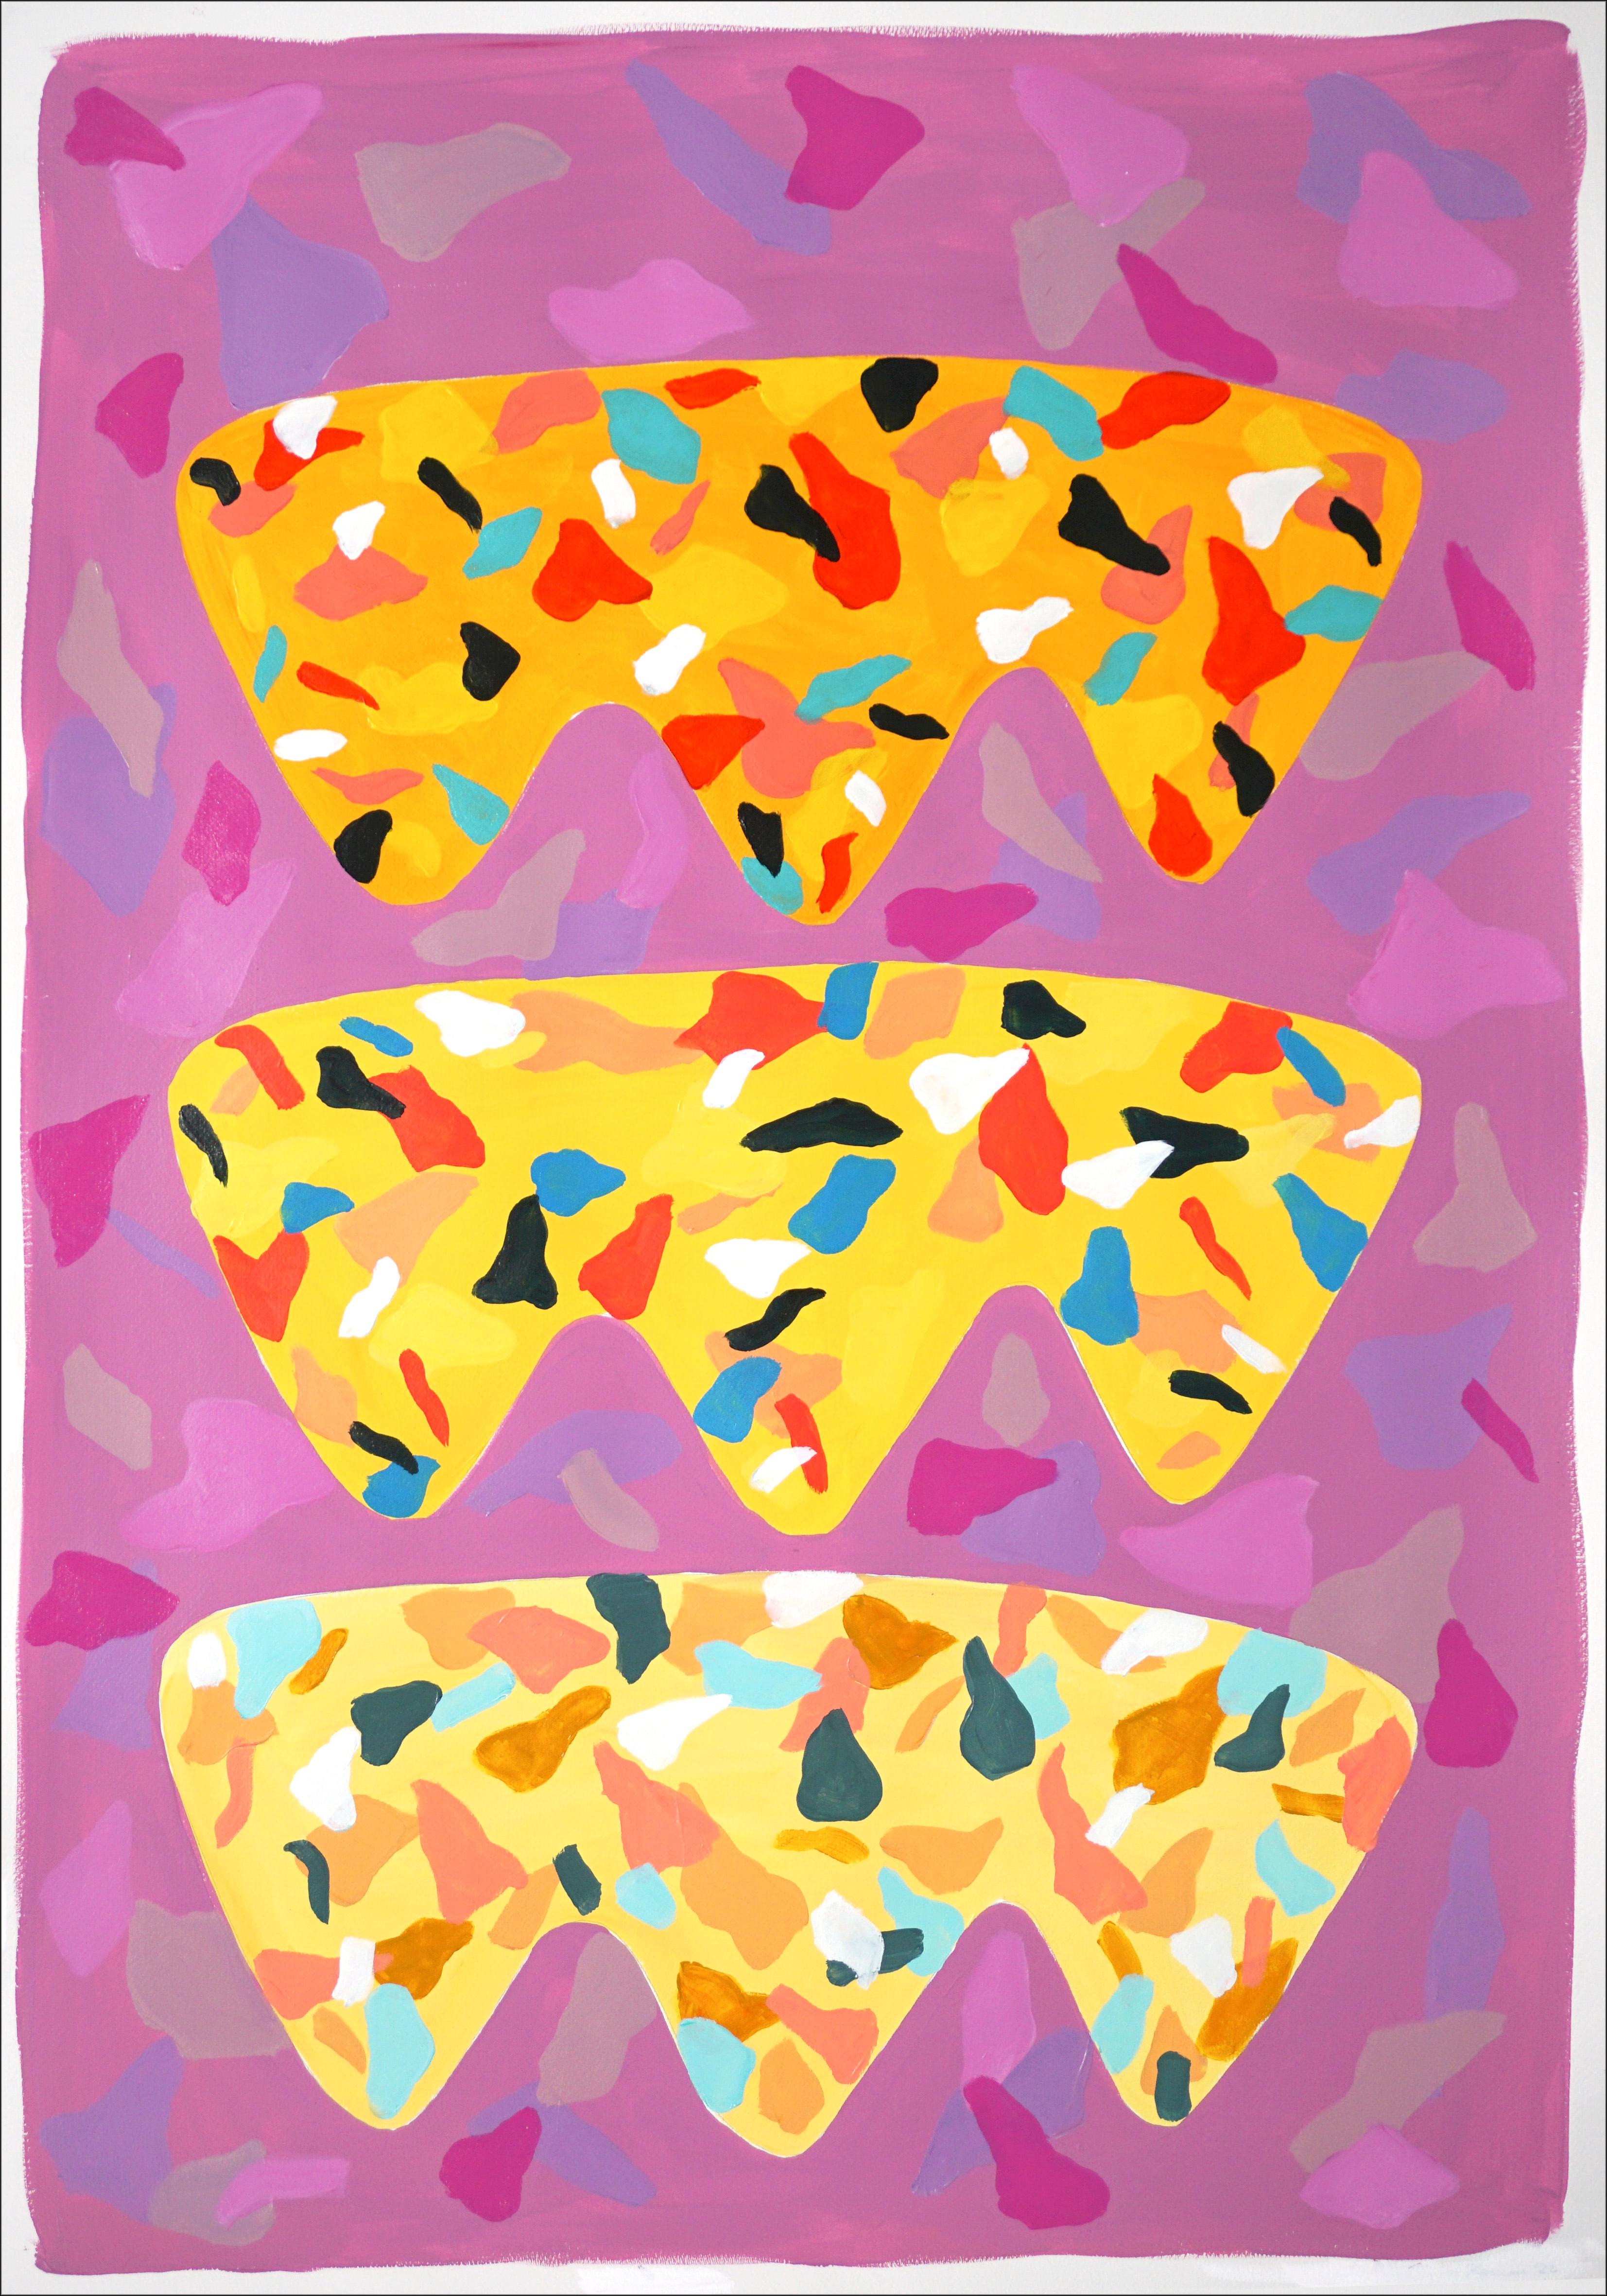 Natalia Roman Abstract Painting - Purple and Orange Melting Shapes, Terrazzo Patterns Style, Vertical Vivid Tones